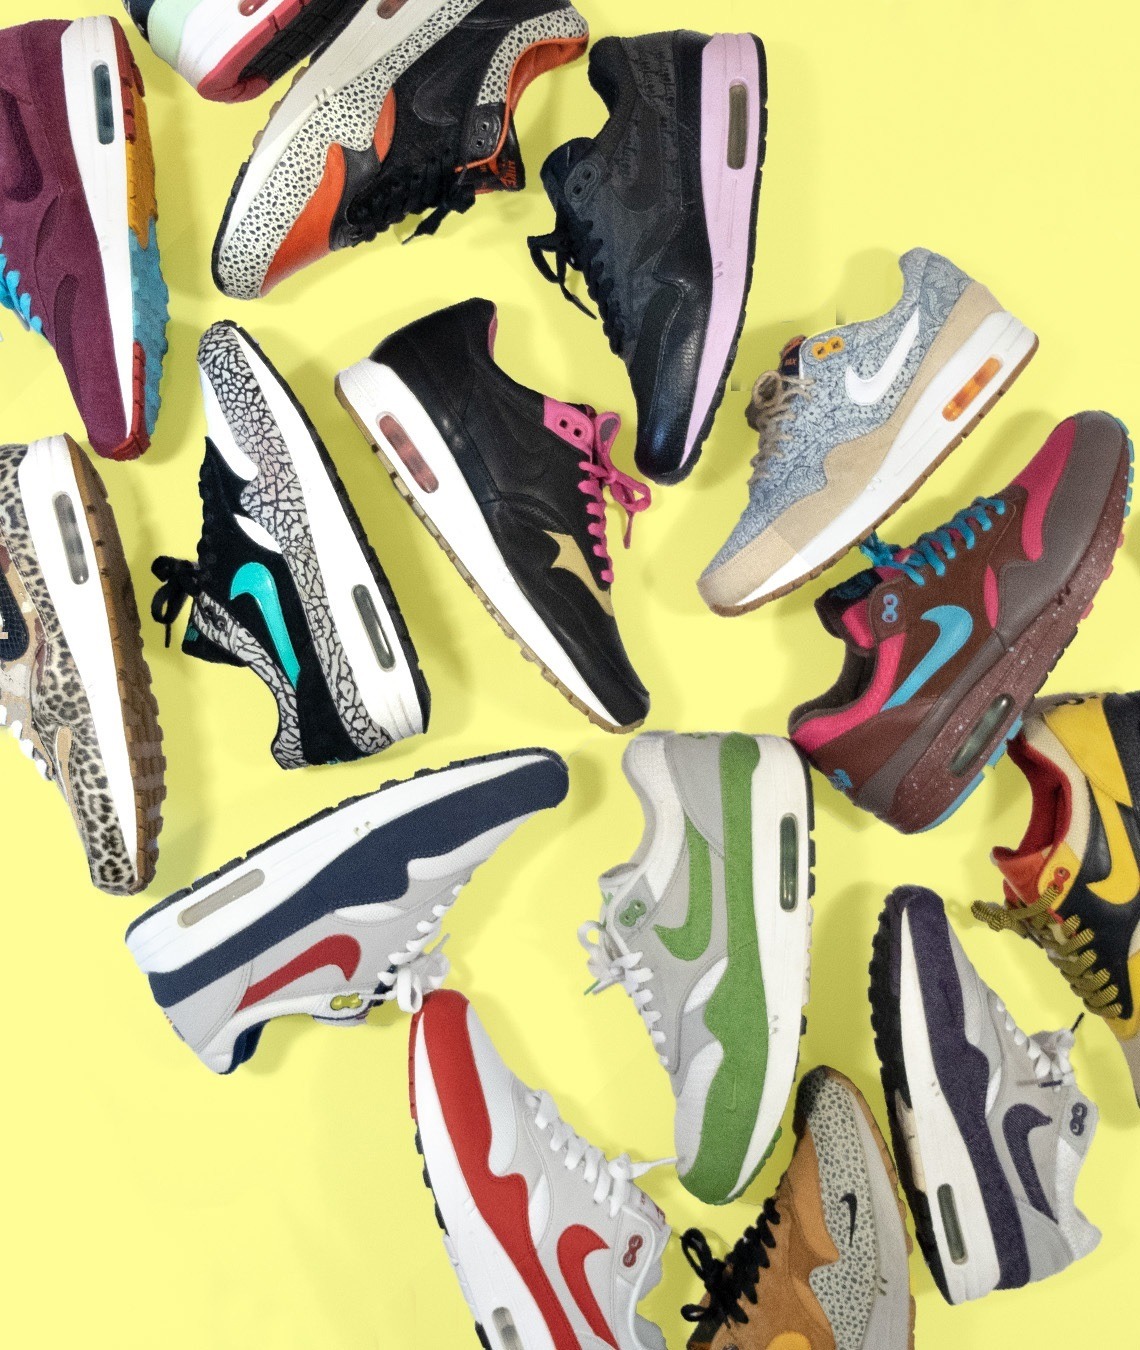 air max collection